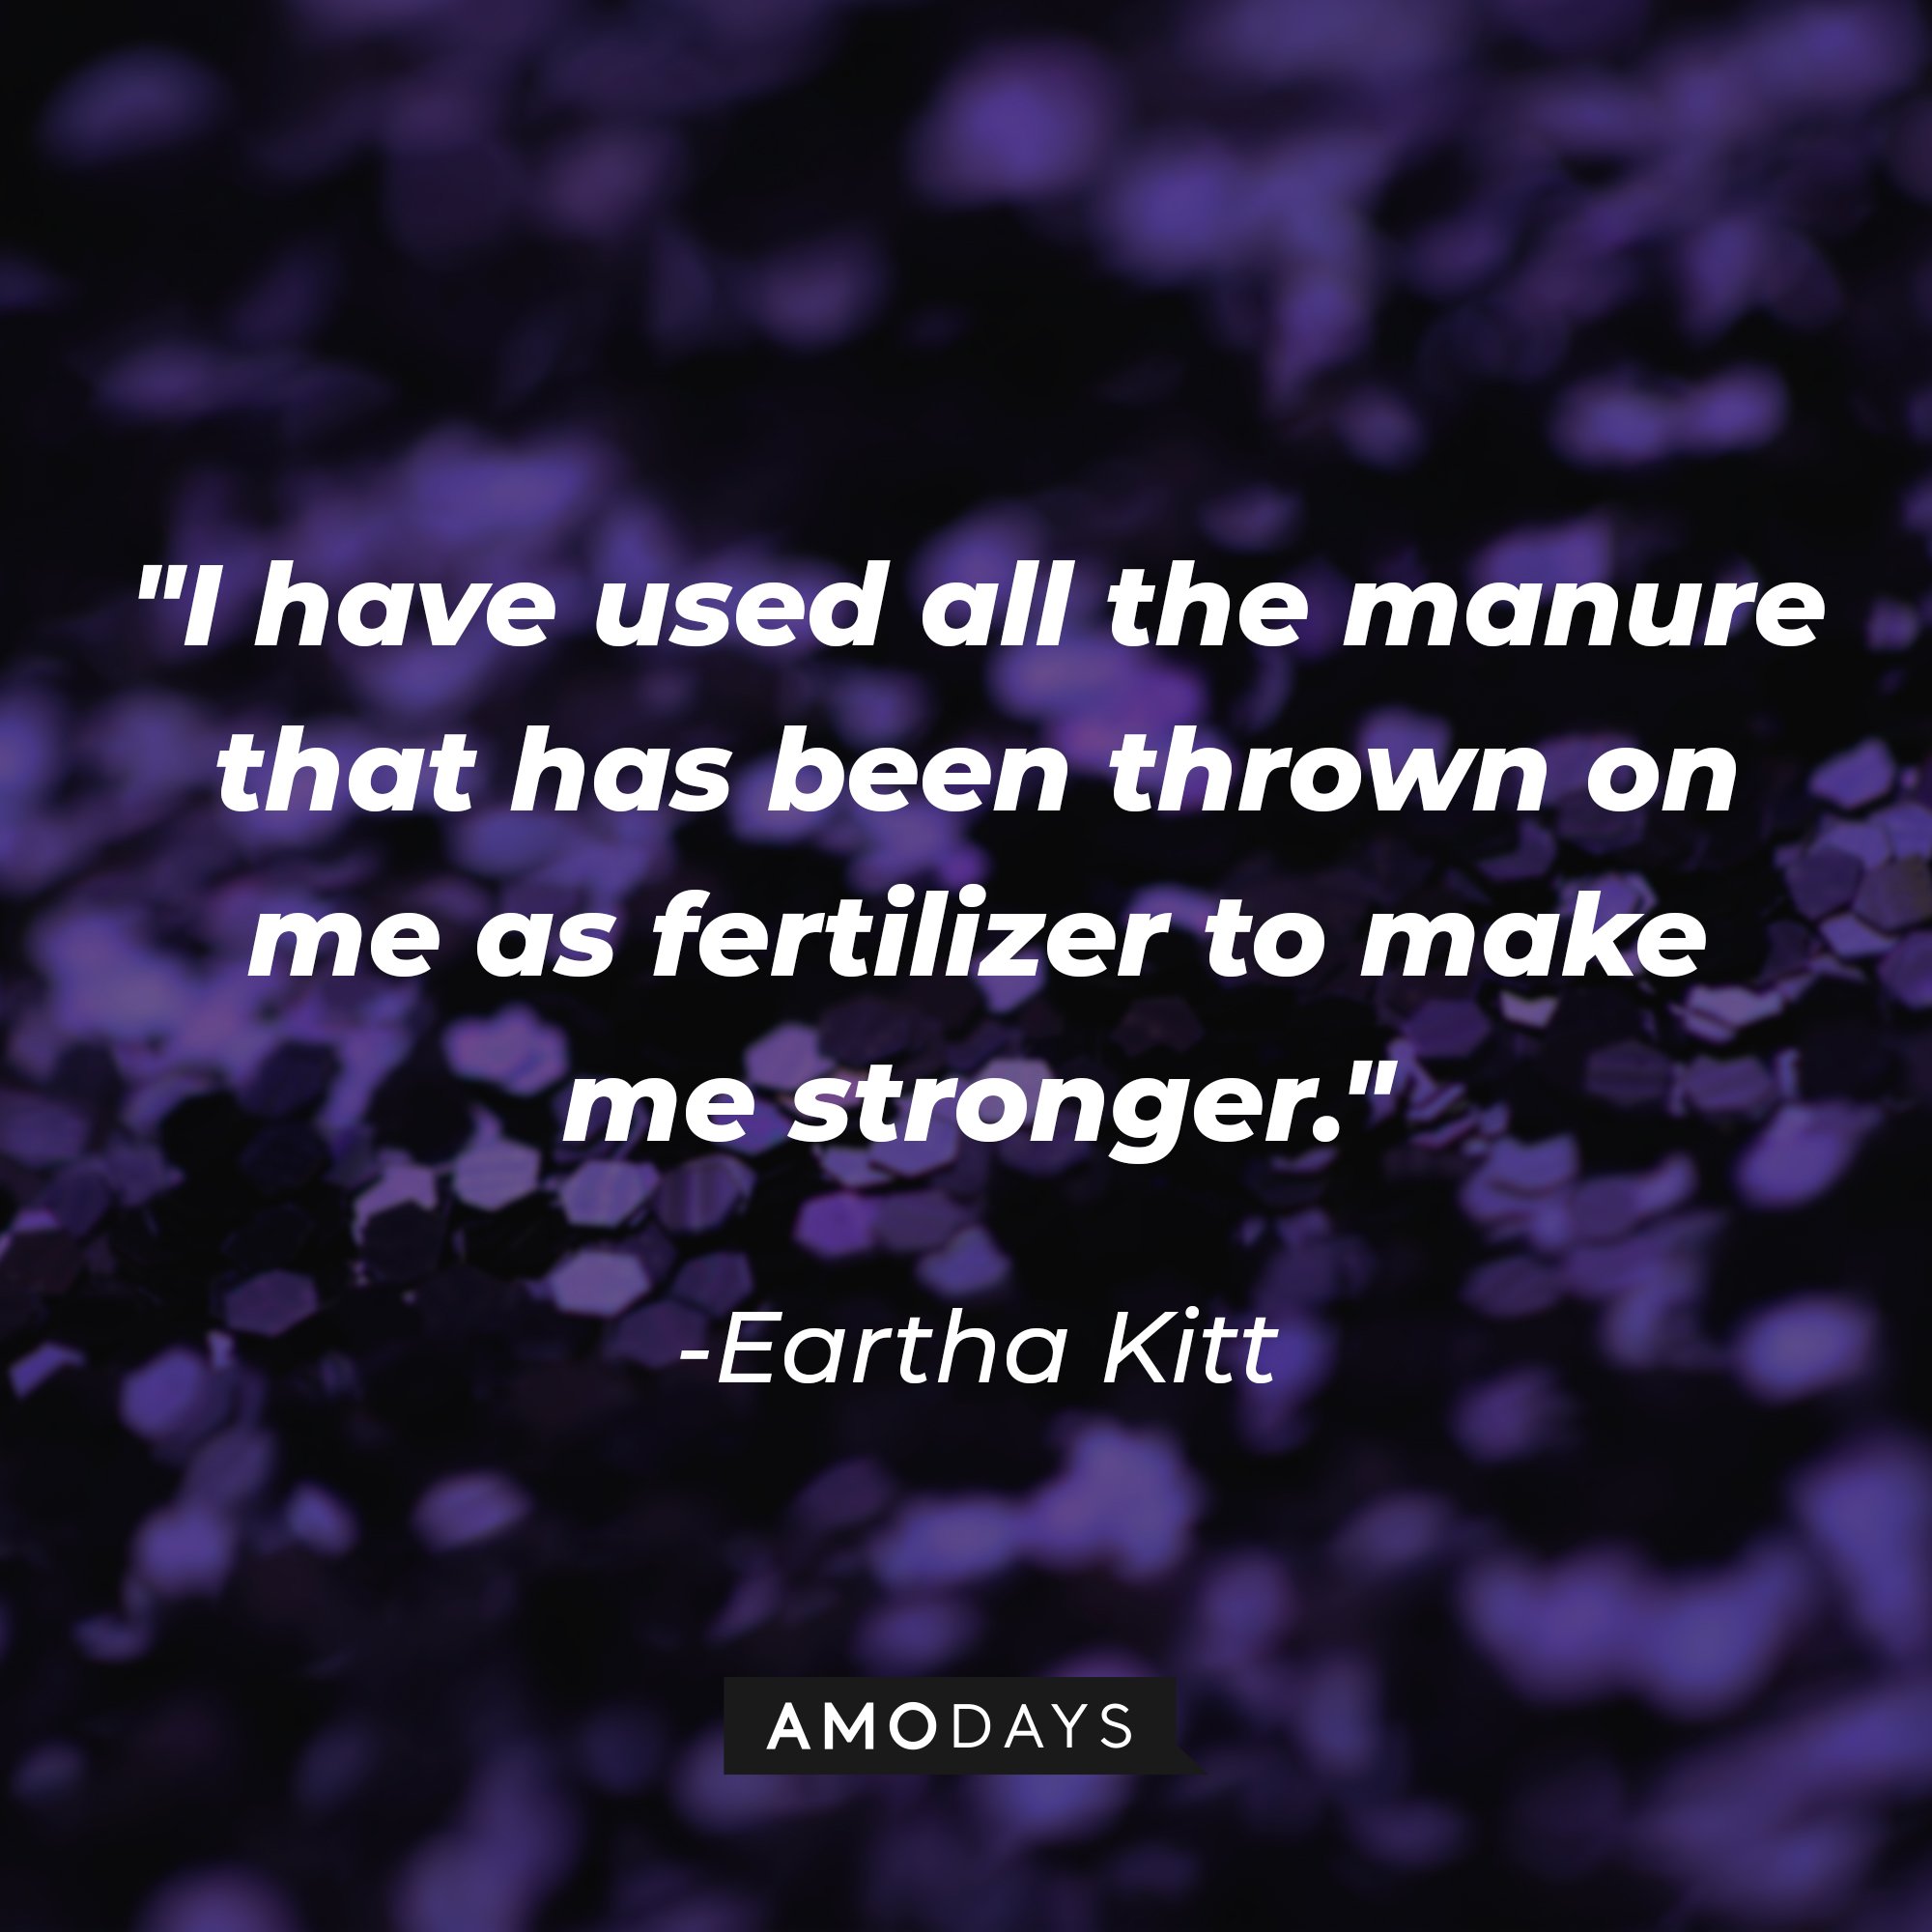 Eartha Kitt’s quote: "I have used all the manure that has been thrown on me as fertilizer to make me stronger." | Image: AmoDays